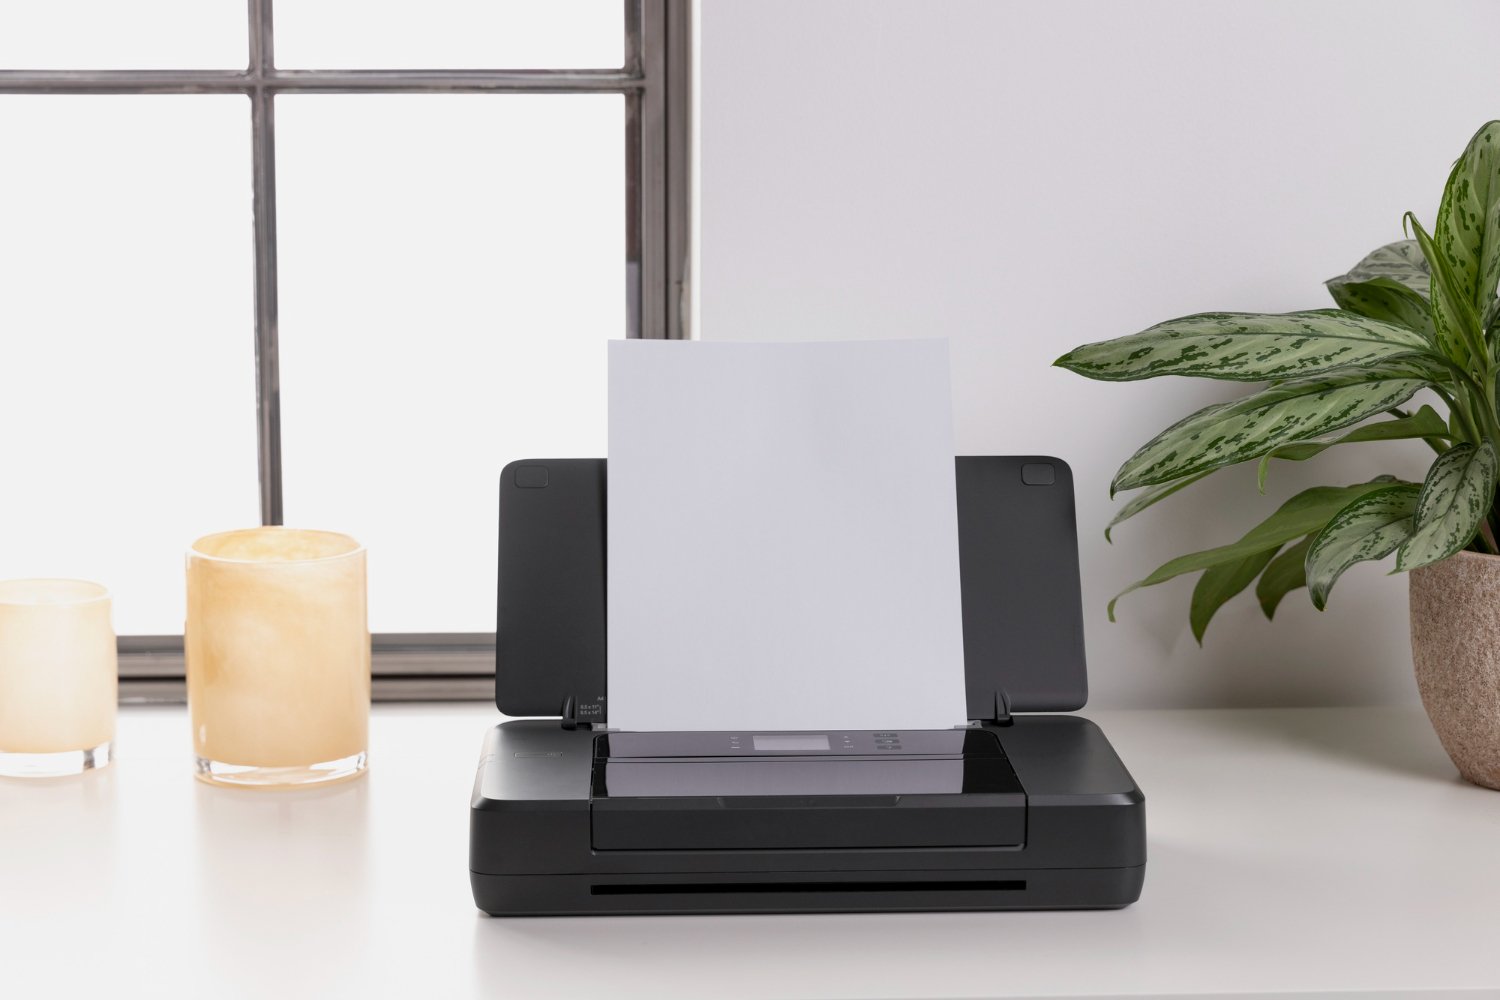 The Best Dell Printers